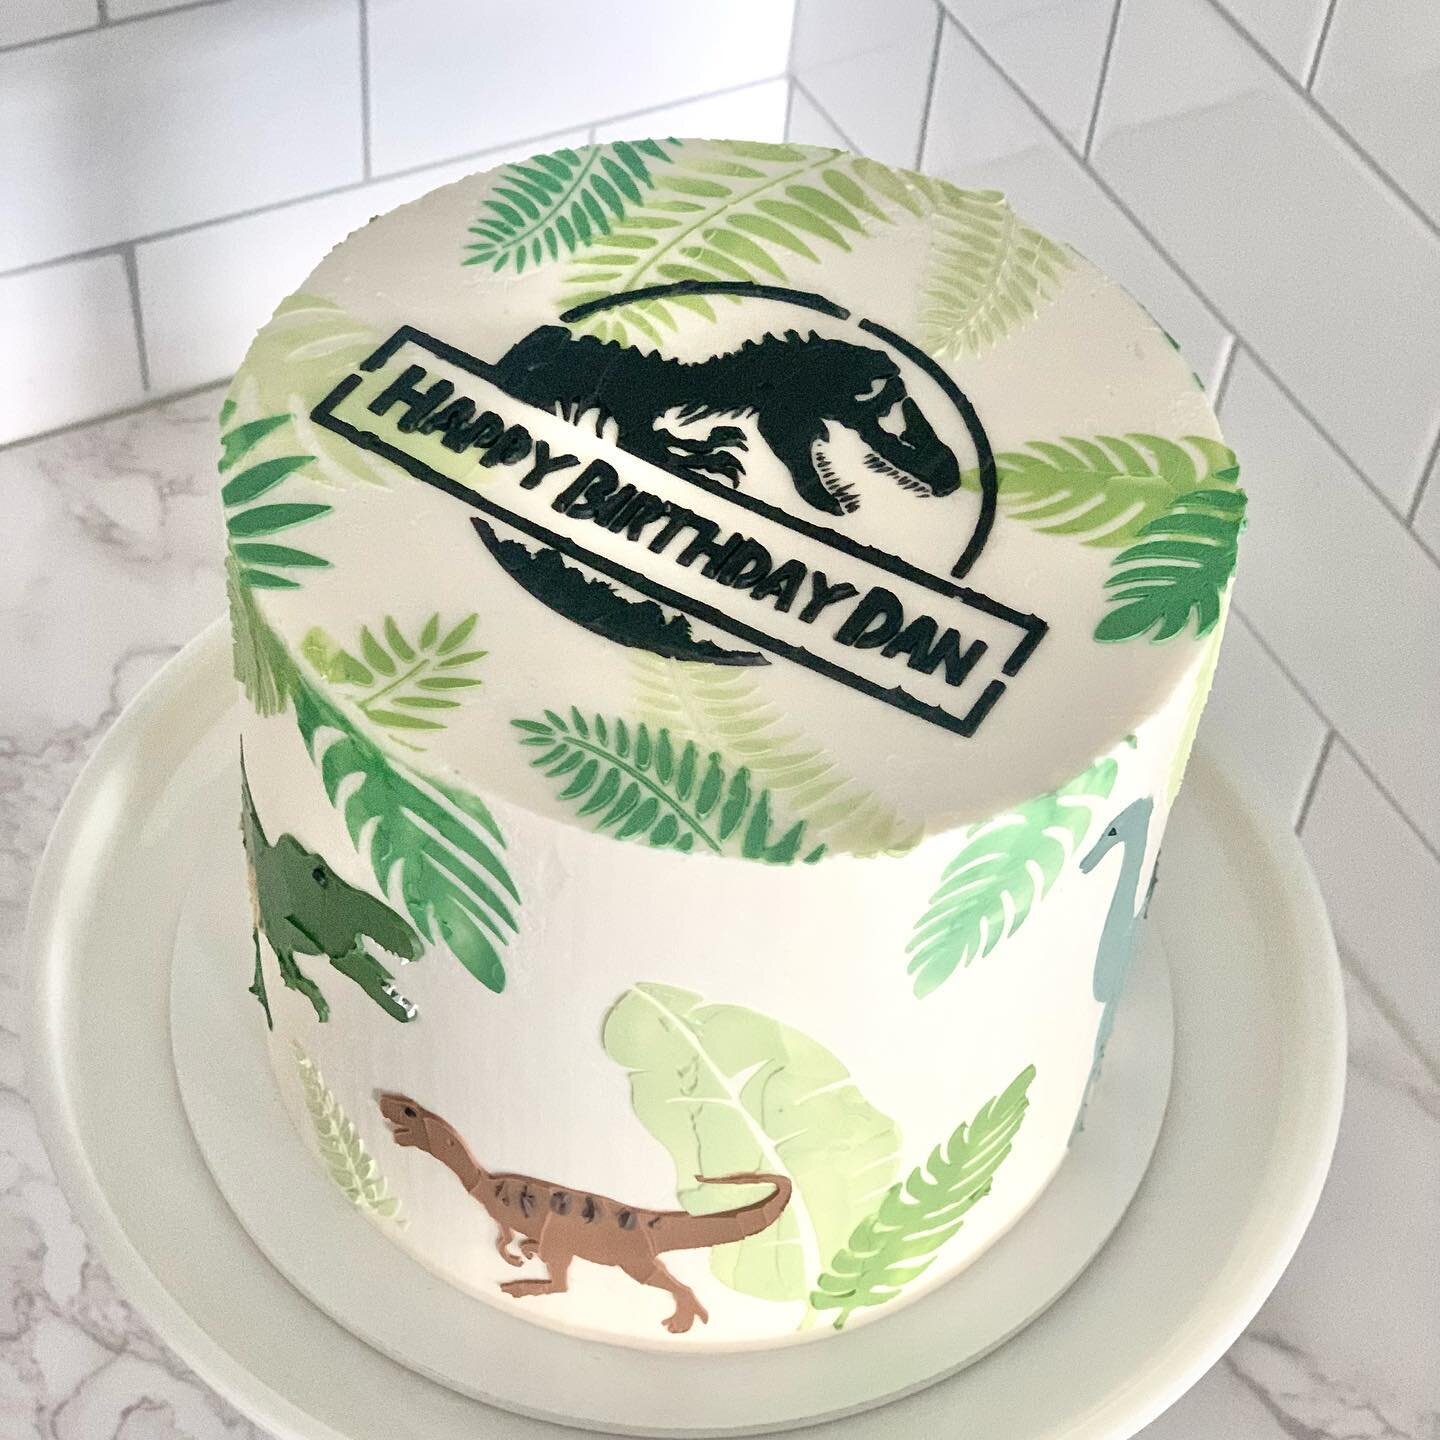 Another dino themed cake for a Jurassic Park fan! Inside is chocolate cake with cookies &amp; cream buttercream.